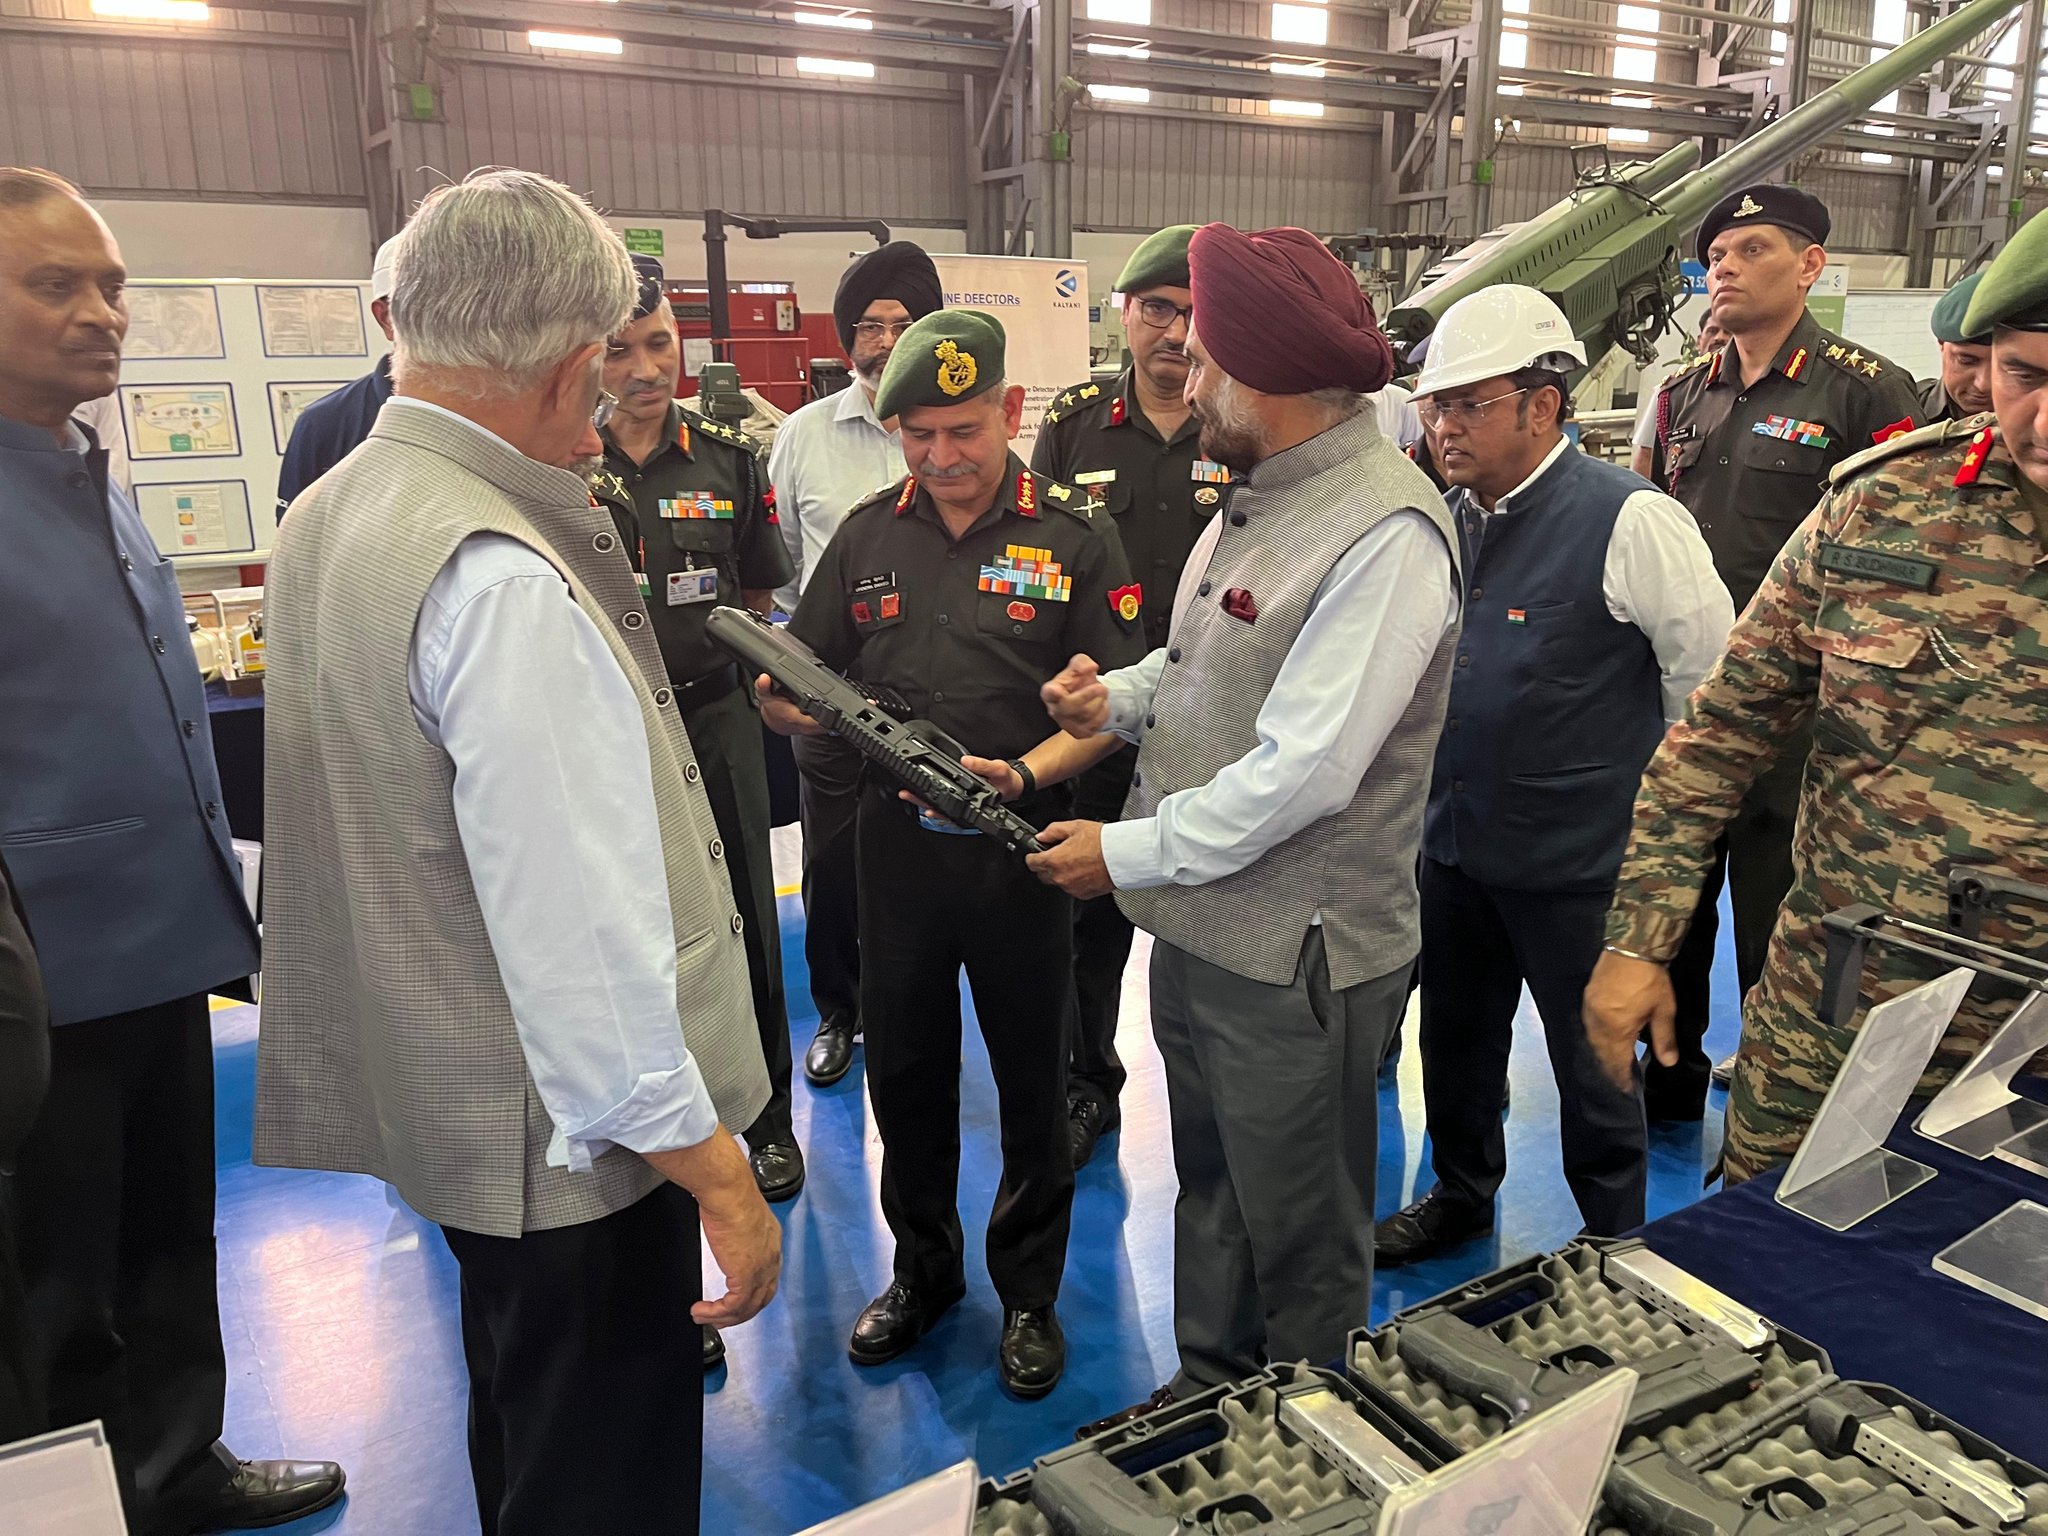 Pune Defence Manufacturing Units Showcase Cutting-Edge Technology To Army Vice Chief